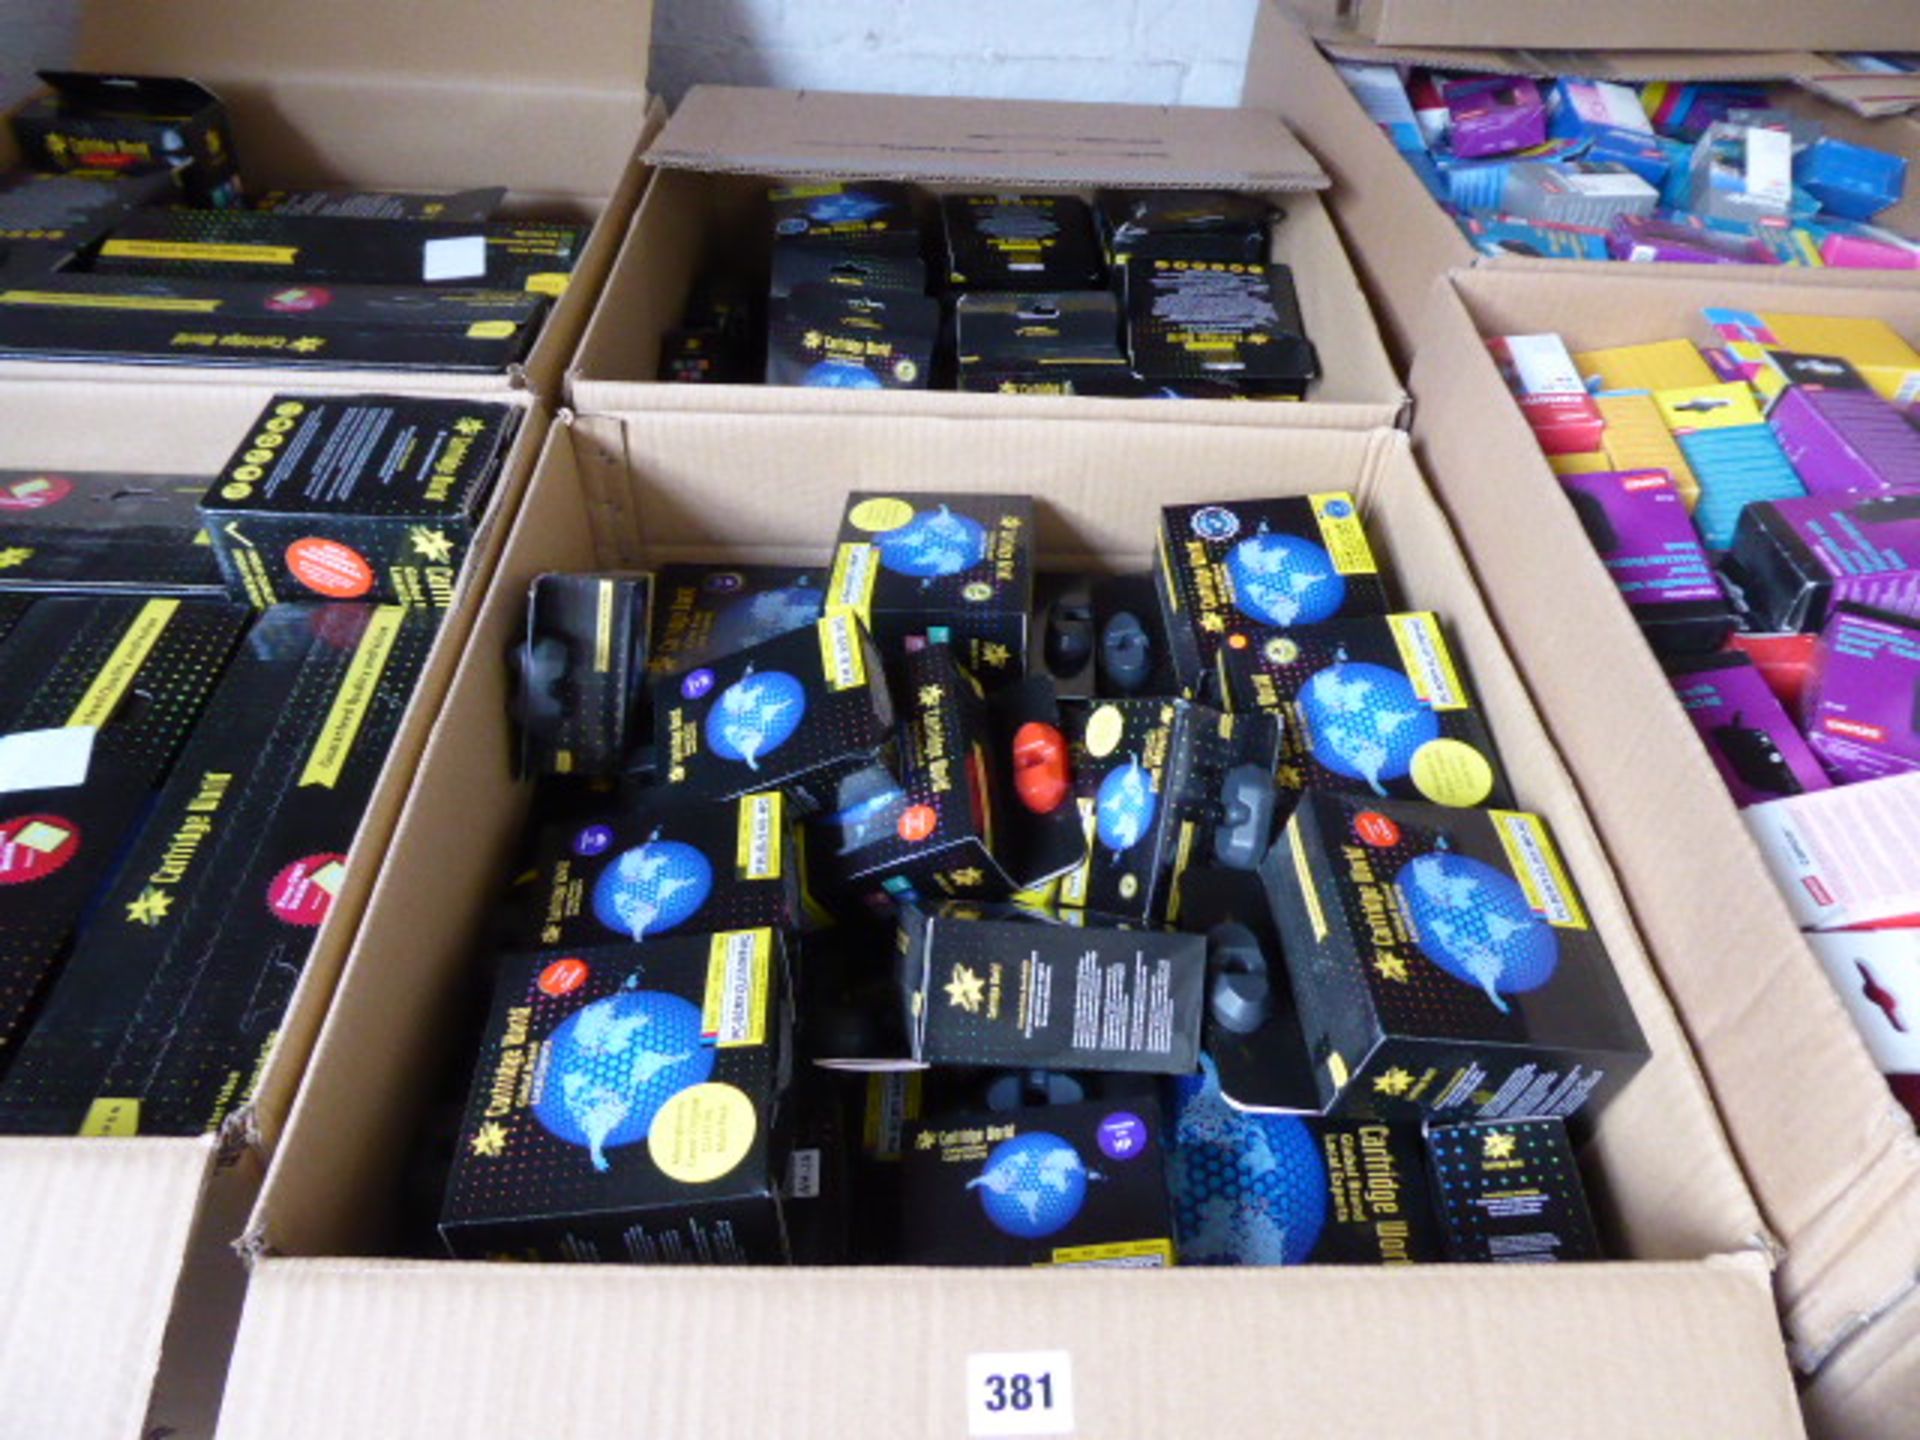 2 large boxes of mainly home printer ink